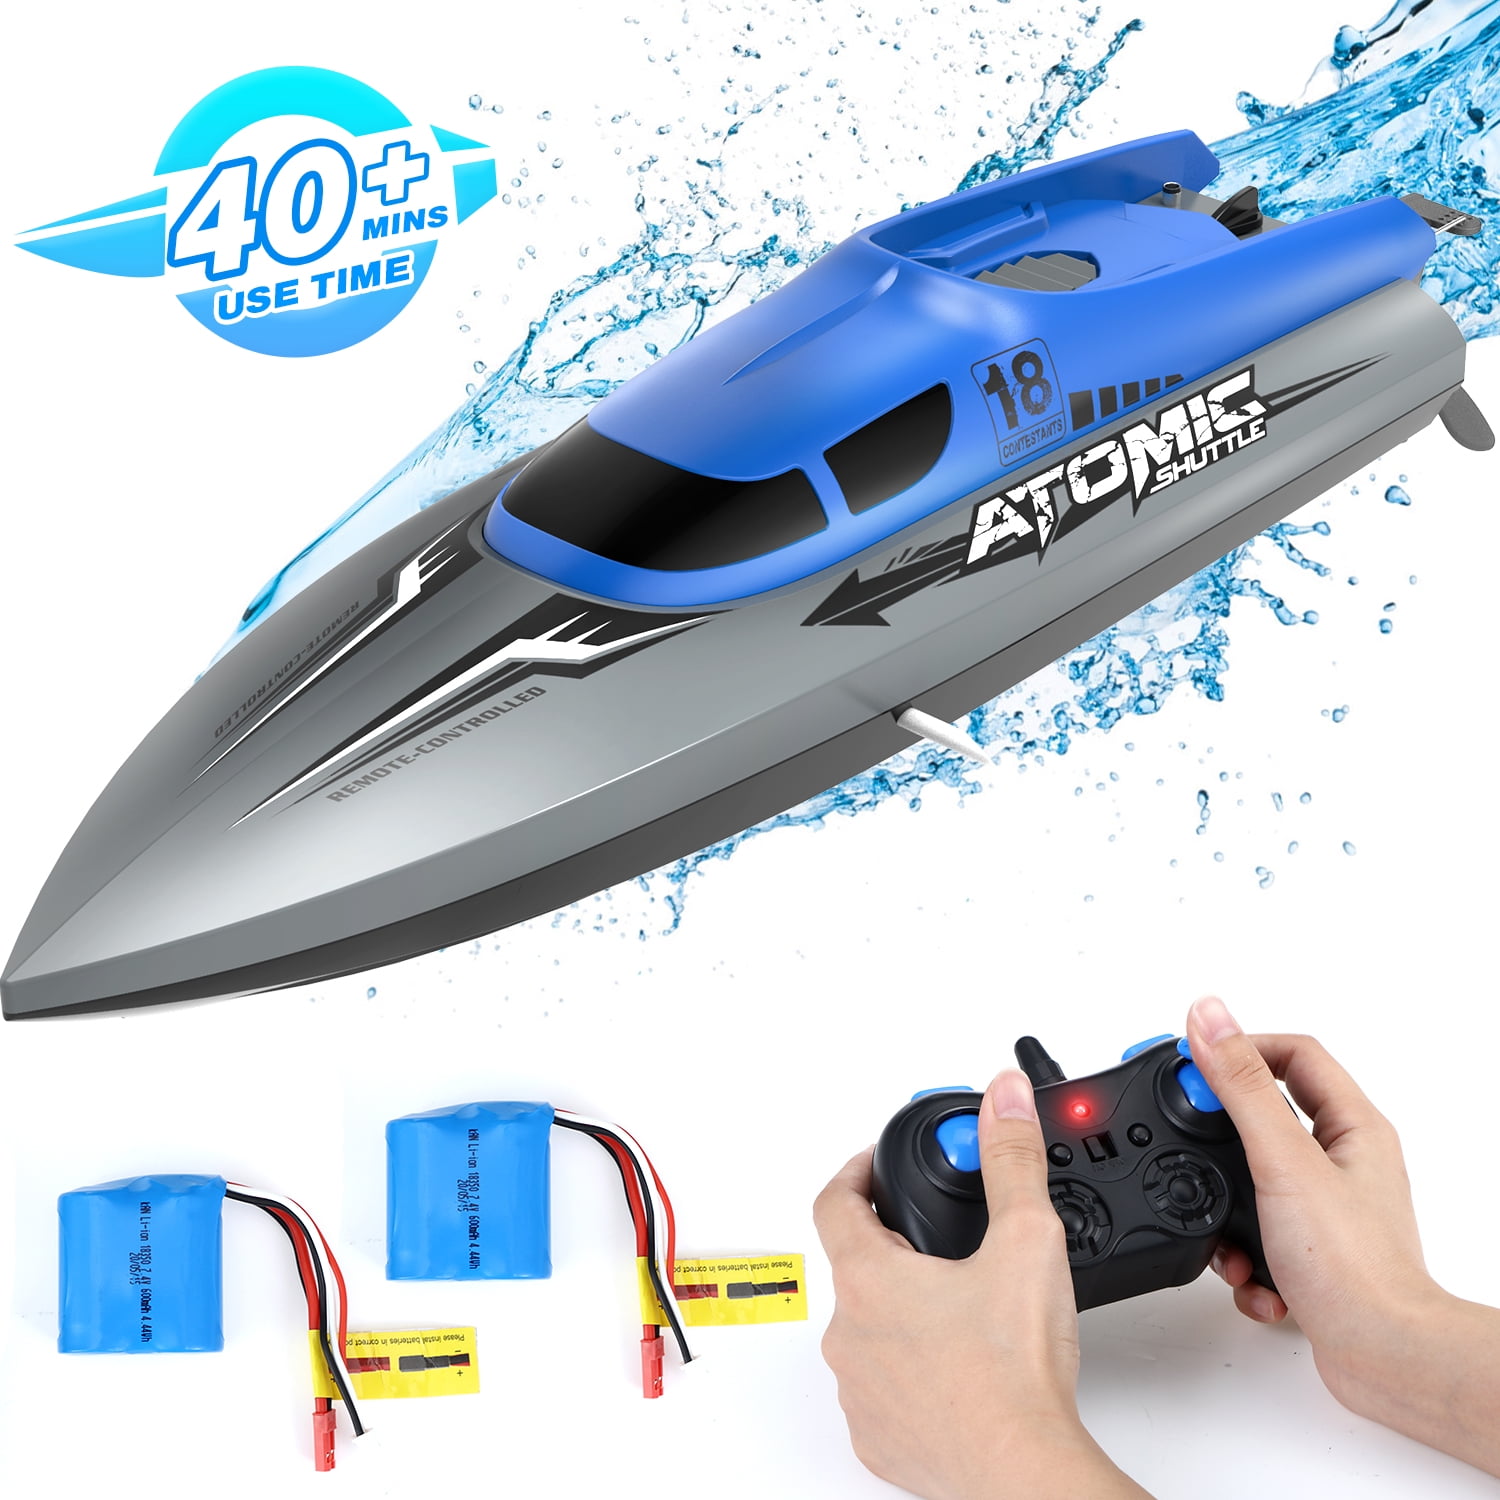 Details about   DEERC H120 RC Boat Remote Control Boats for Pools and Lakes 20 mph 2.4 GHz ... 